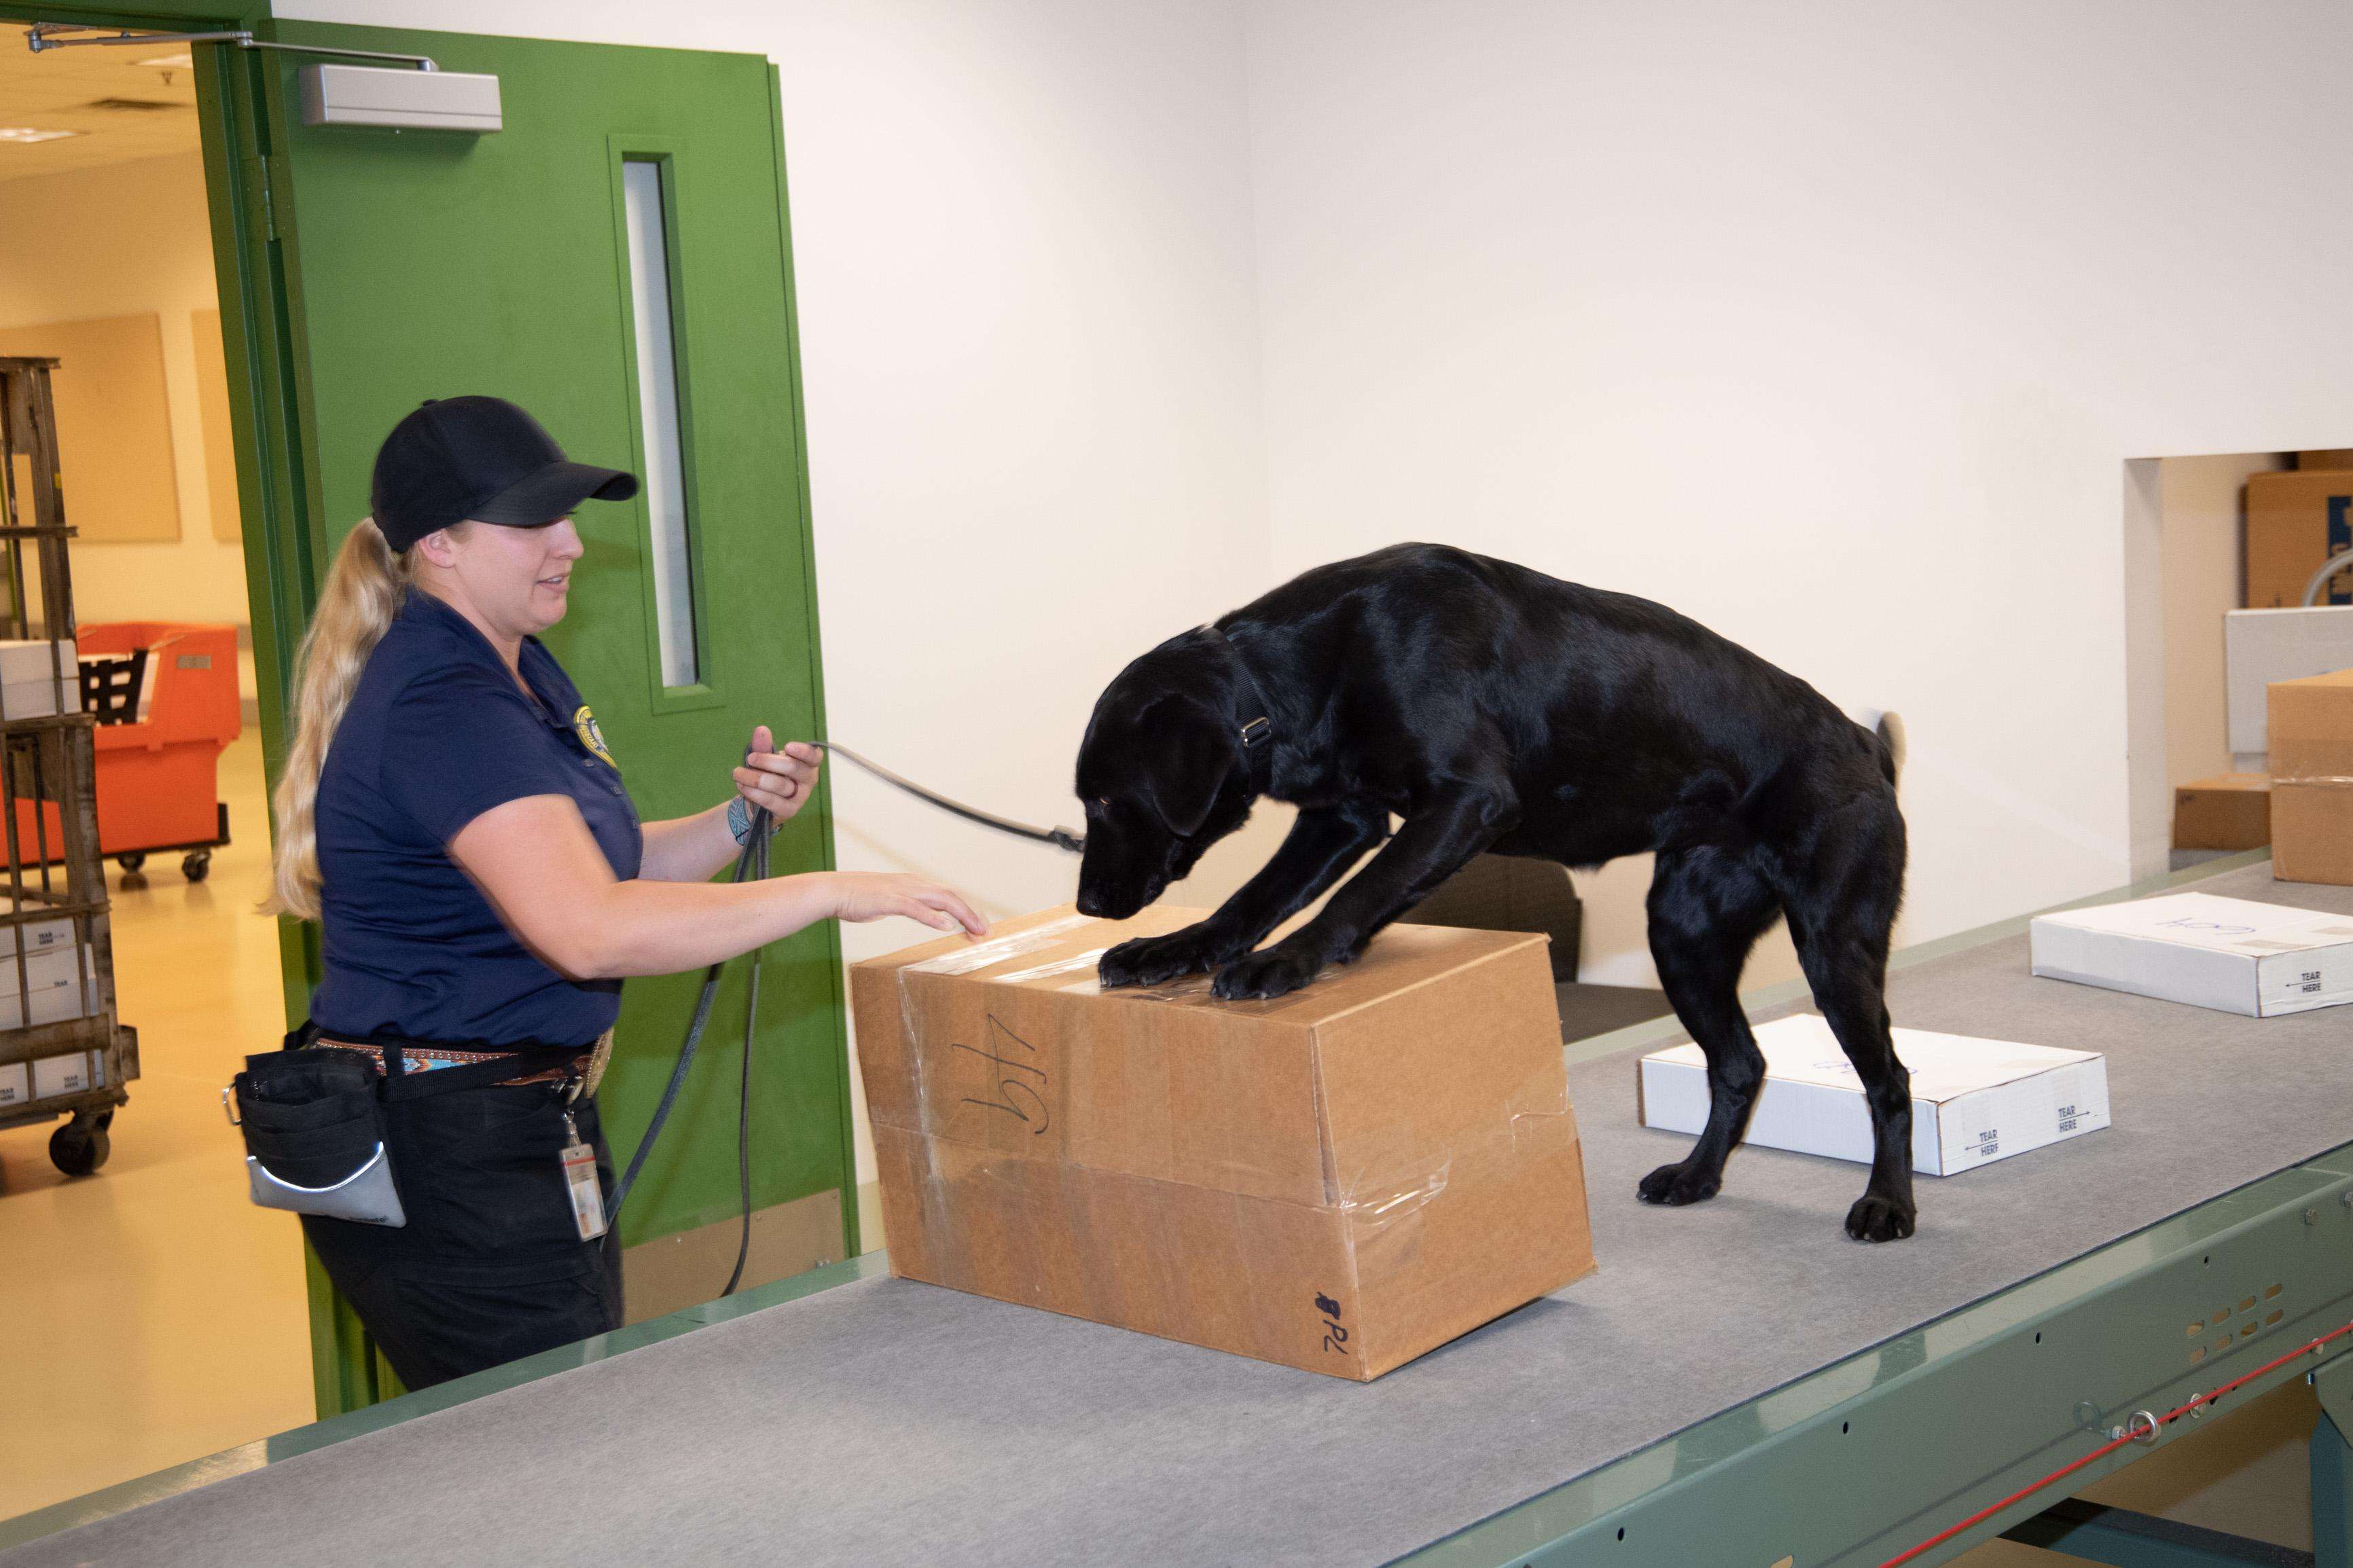 Agriculture's detector dog sniffs out prohibited agricultural products in parcels.